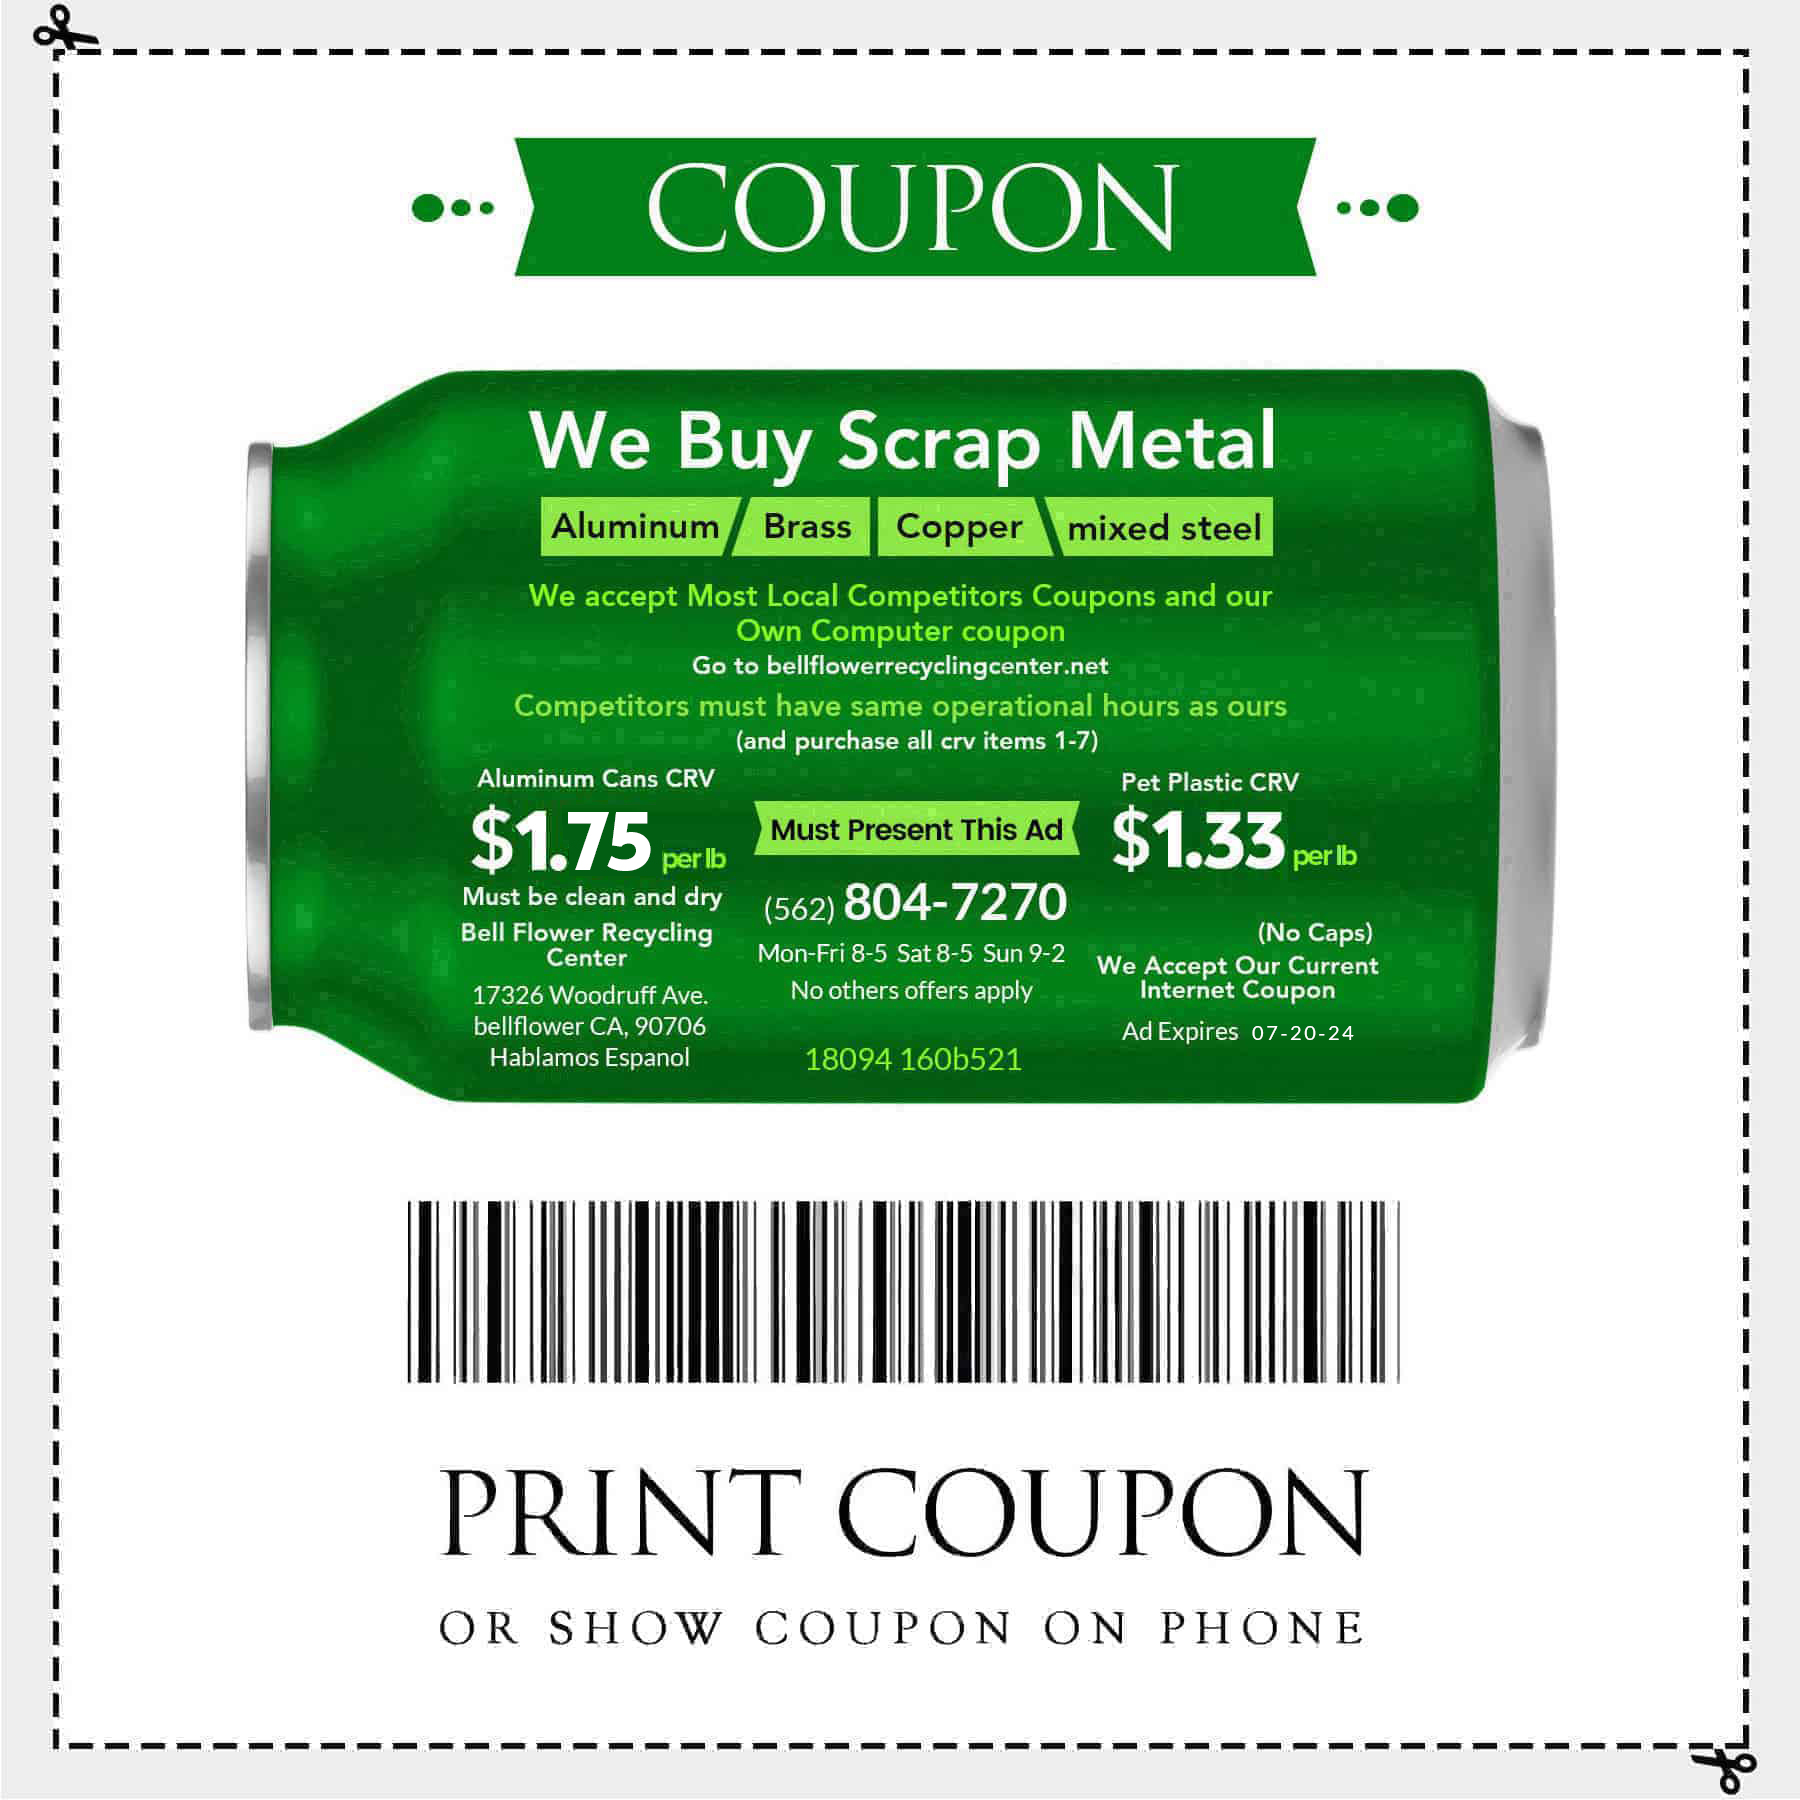 We buy scrap metal Aluminum, Brass, Copper, Mixed steel. We accept most local competitors coupons and our own computer coupon. Competitors must have same operational hours as ours (and purchase all crv items 1-7). One Must present this add. Aluminum Cans CRV $1.75 per lb and Pet Plastic CRV $1.33 per lb.